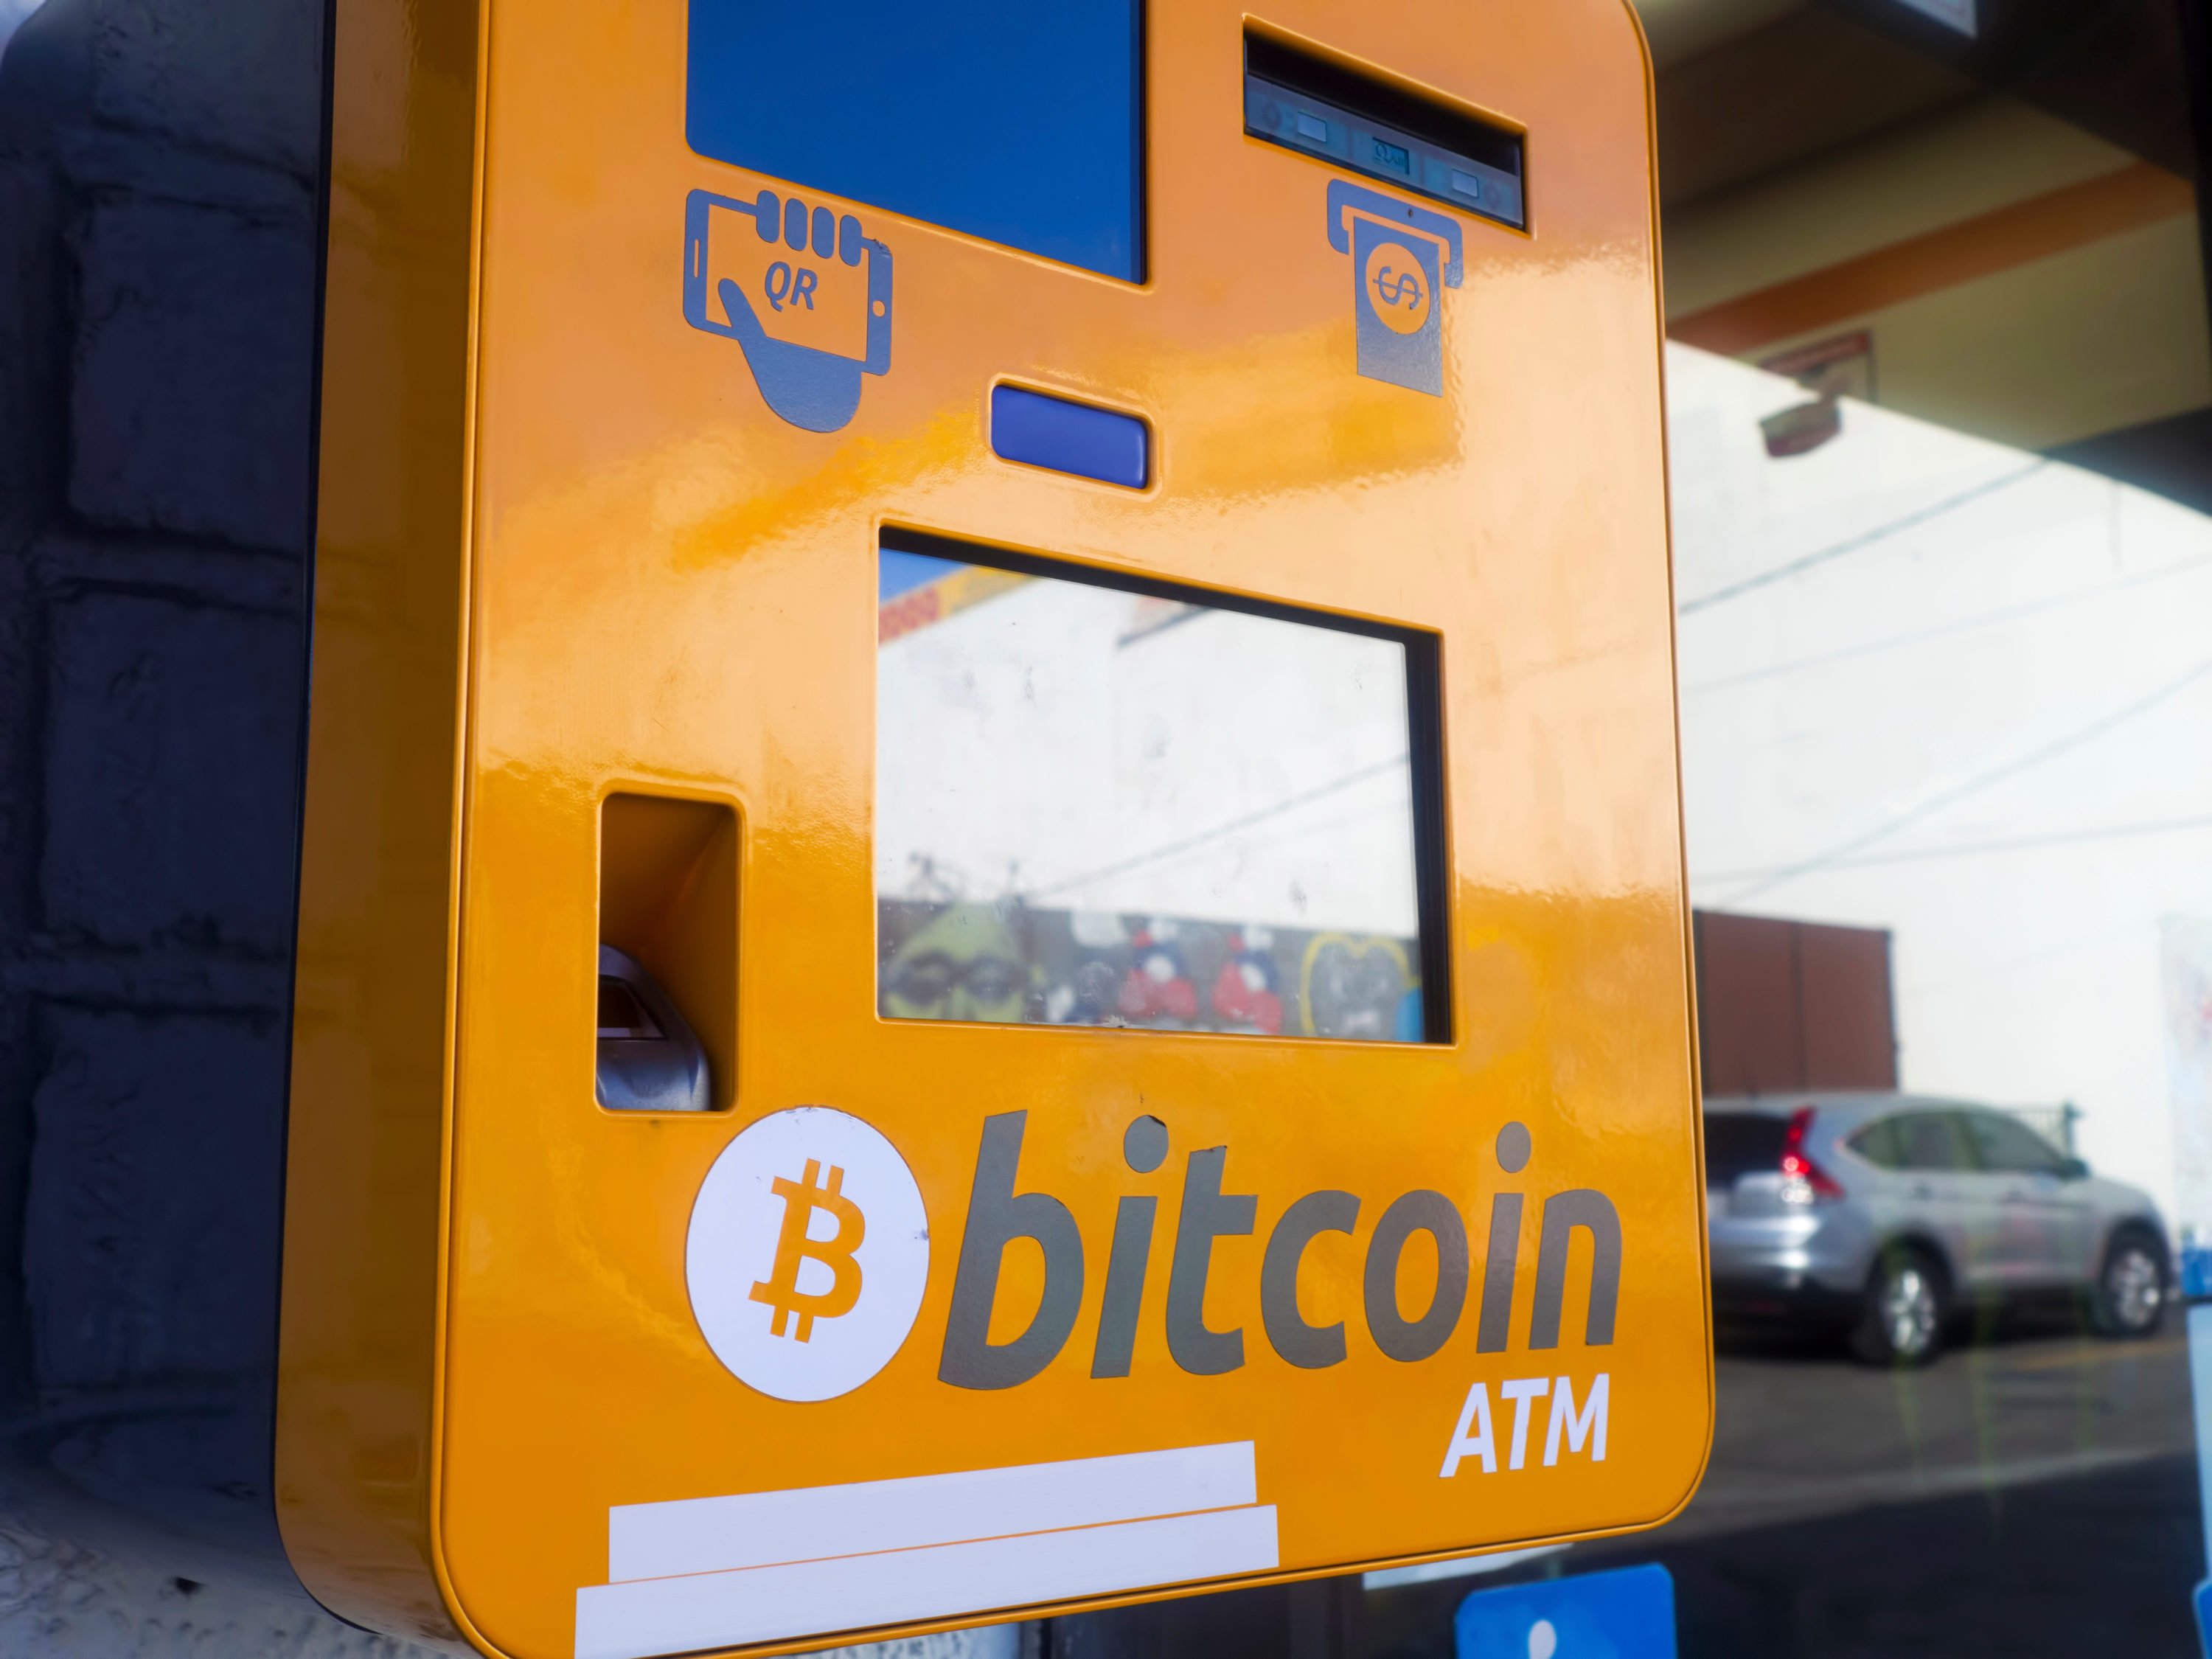 Report: Philippines-Based Banking Giant Launching Two-Way Crypto ATMs